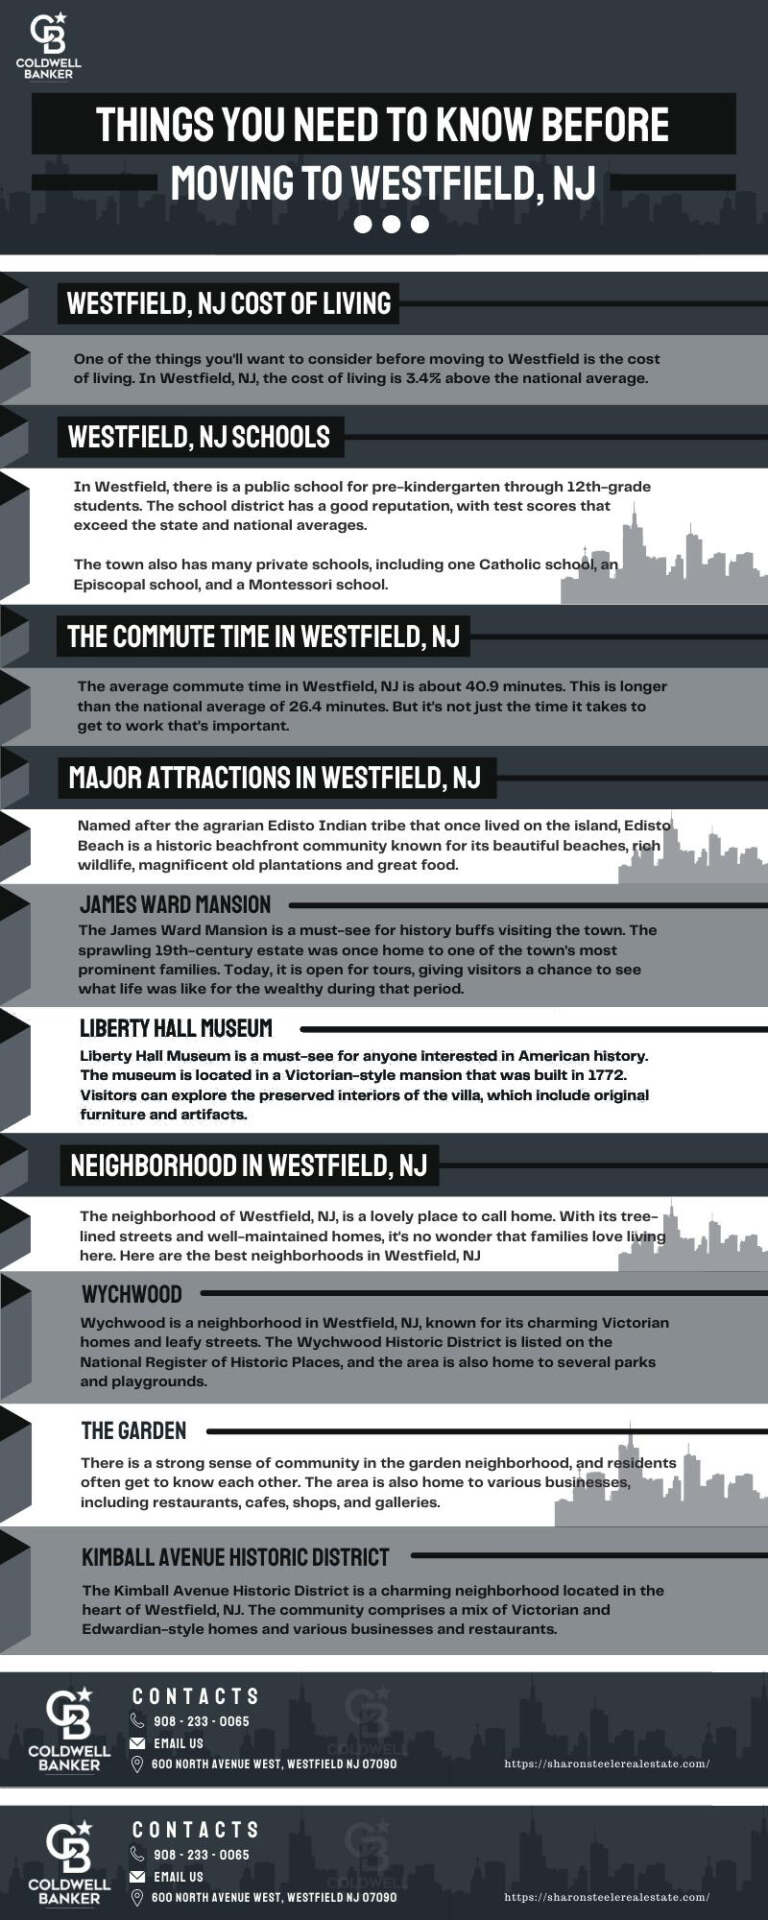 moving to westfield nj, Things You Need to Know Before Moving to Westfield, NJ